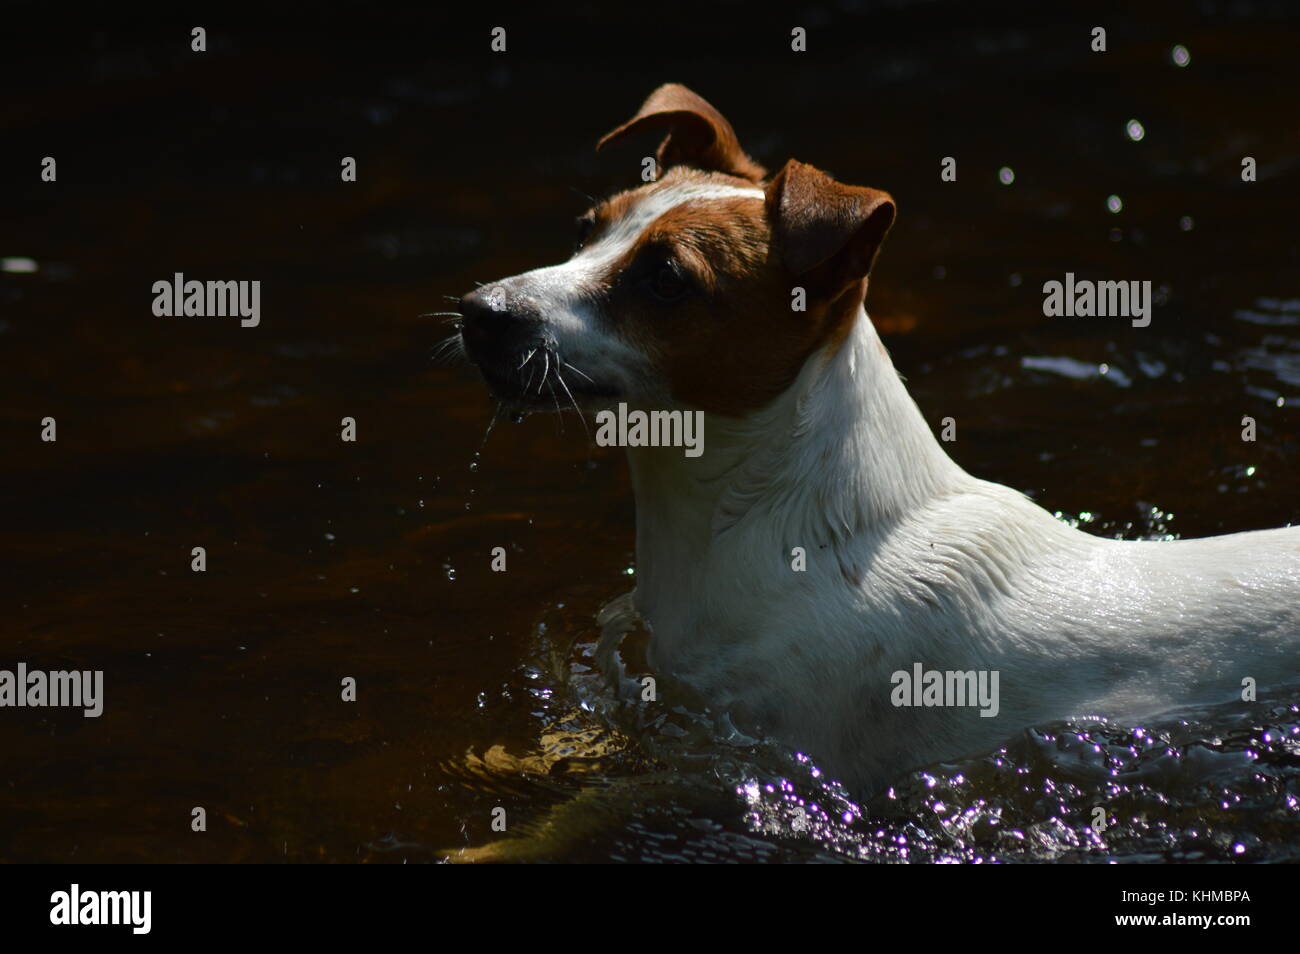 jack Russell swimming in water Stock Photo